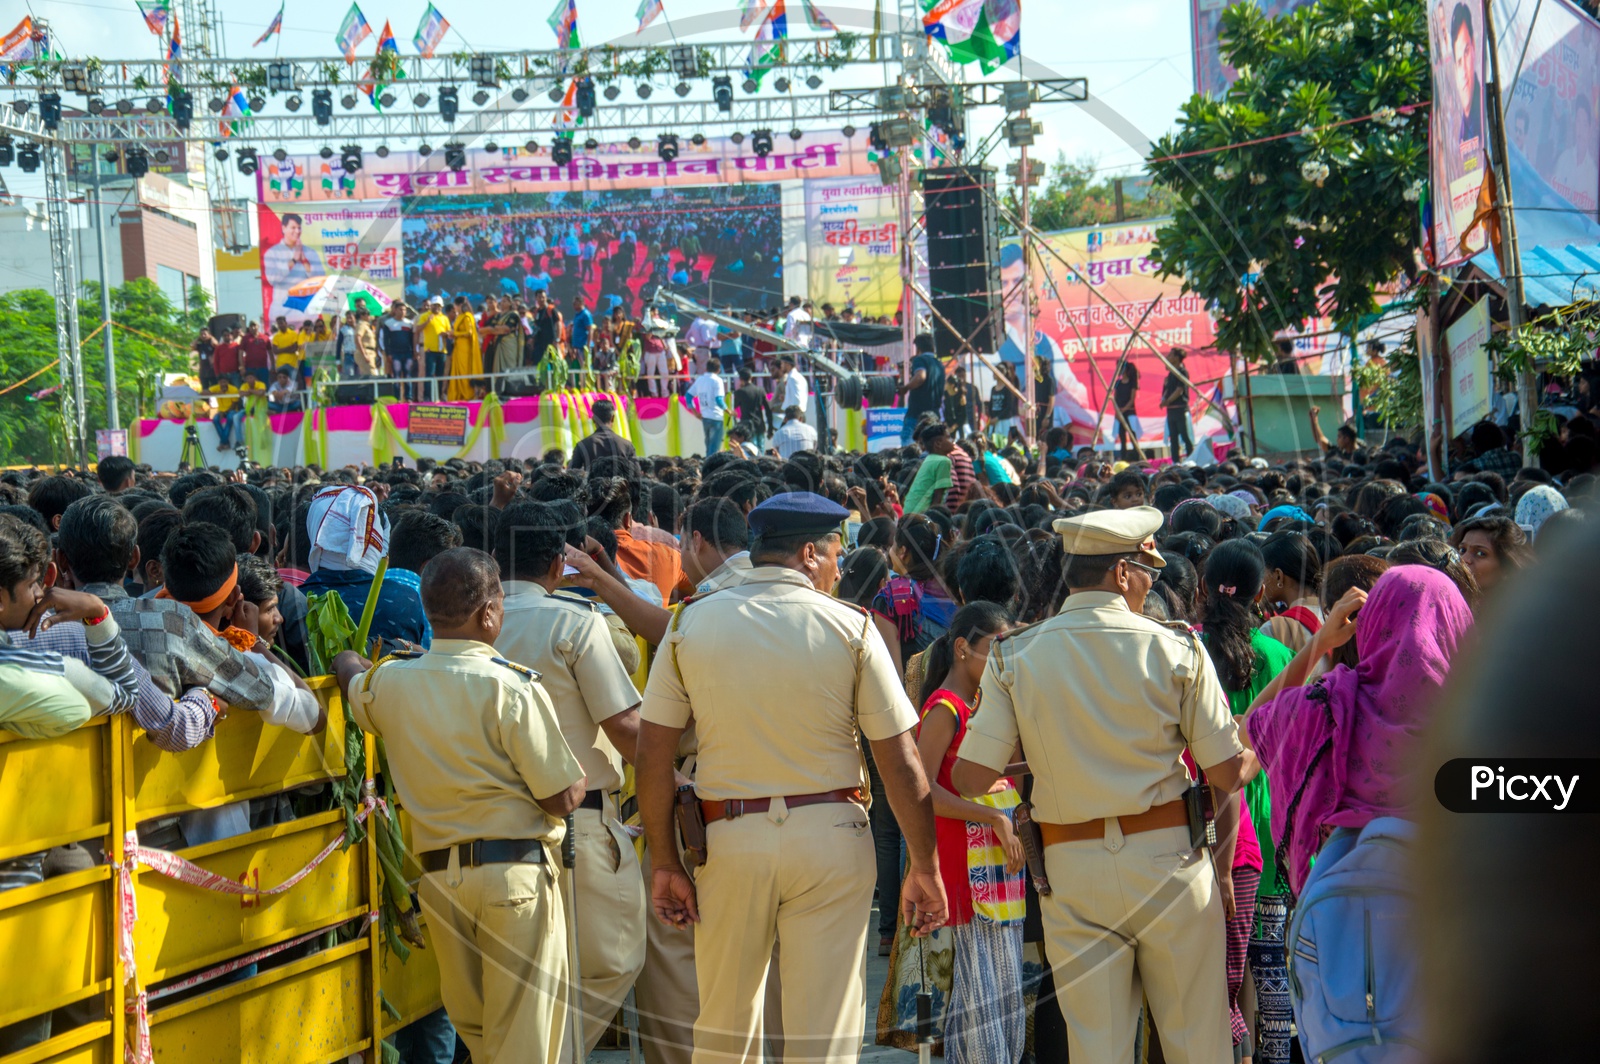 Indian Police Man Or Security Personnel At Public Events